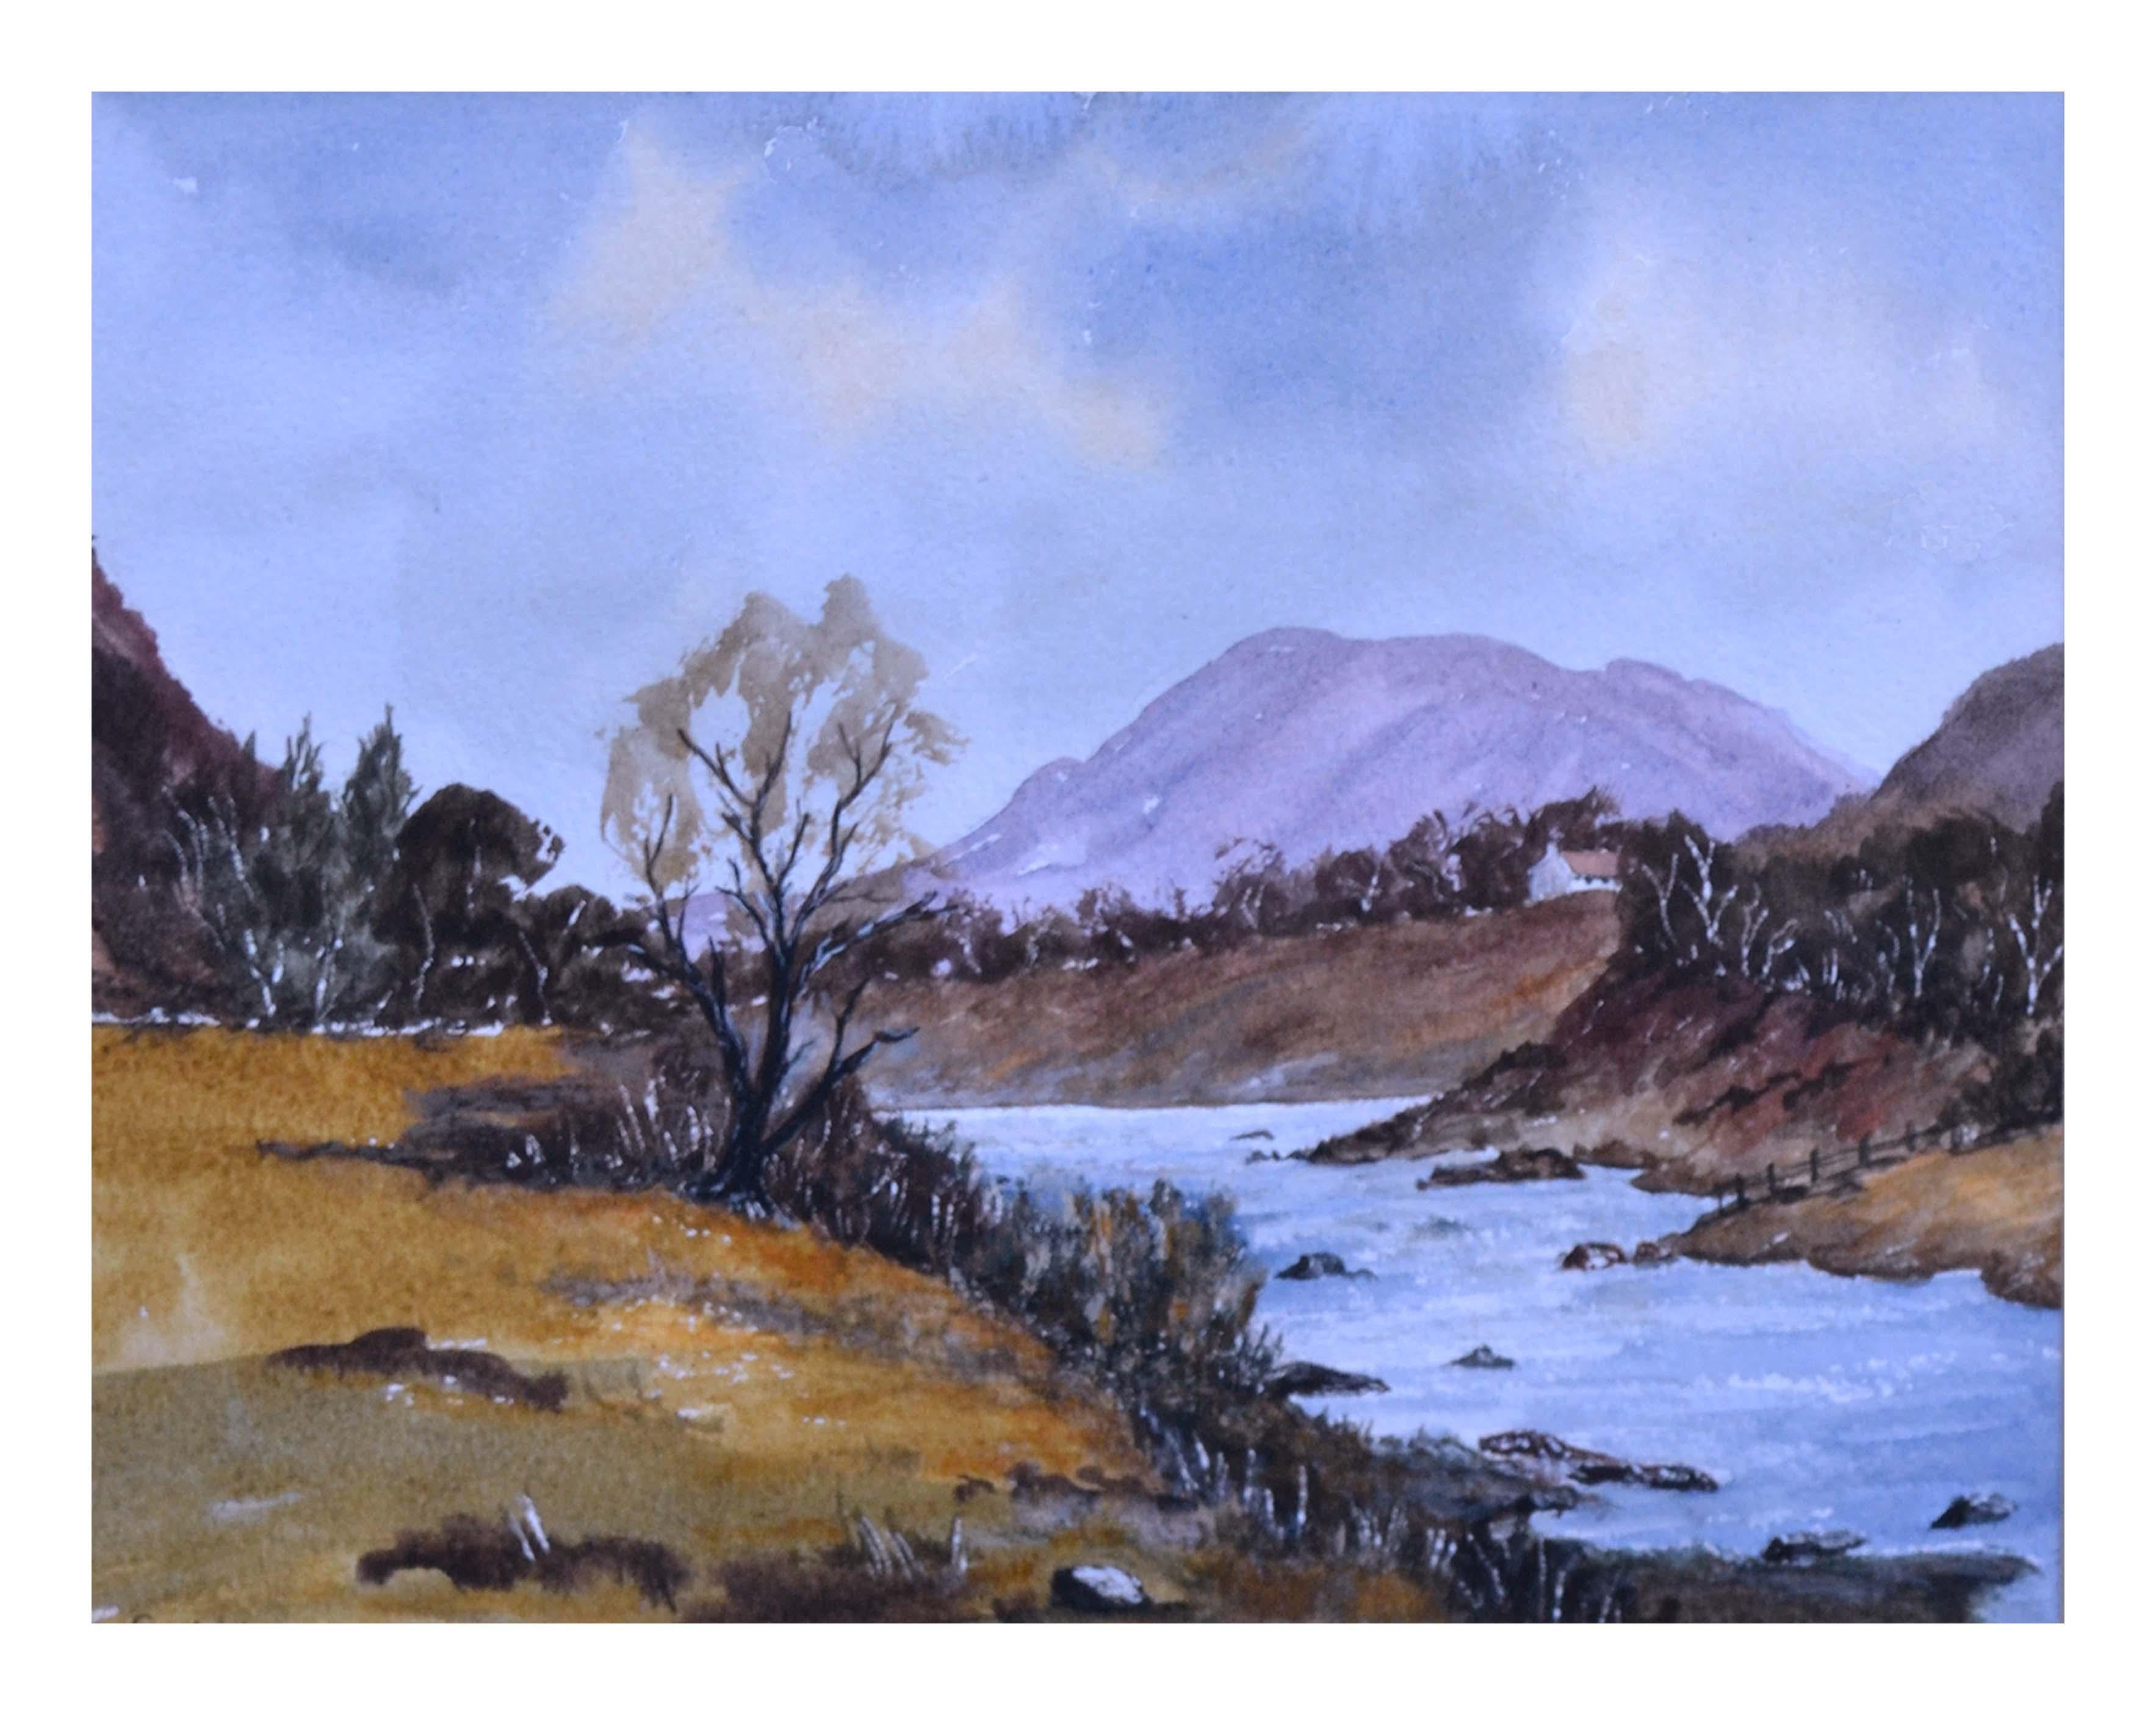 Scottish Highlands with Stream, Small-Scale Mountain Landscape Watercolor  - Painting by Sean H Fairclough